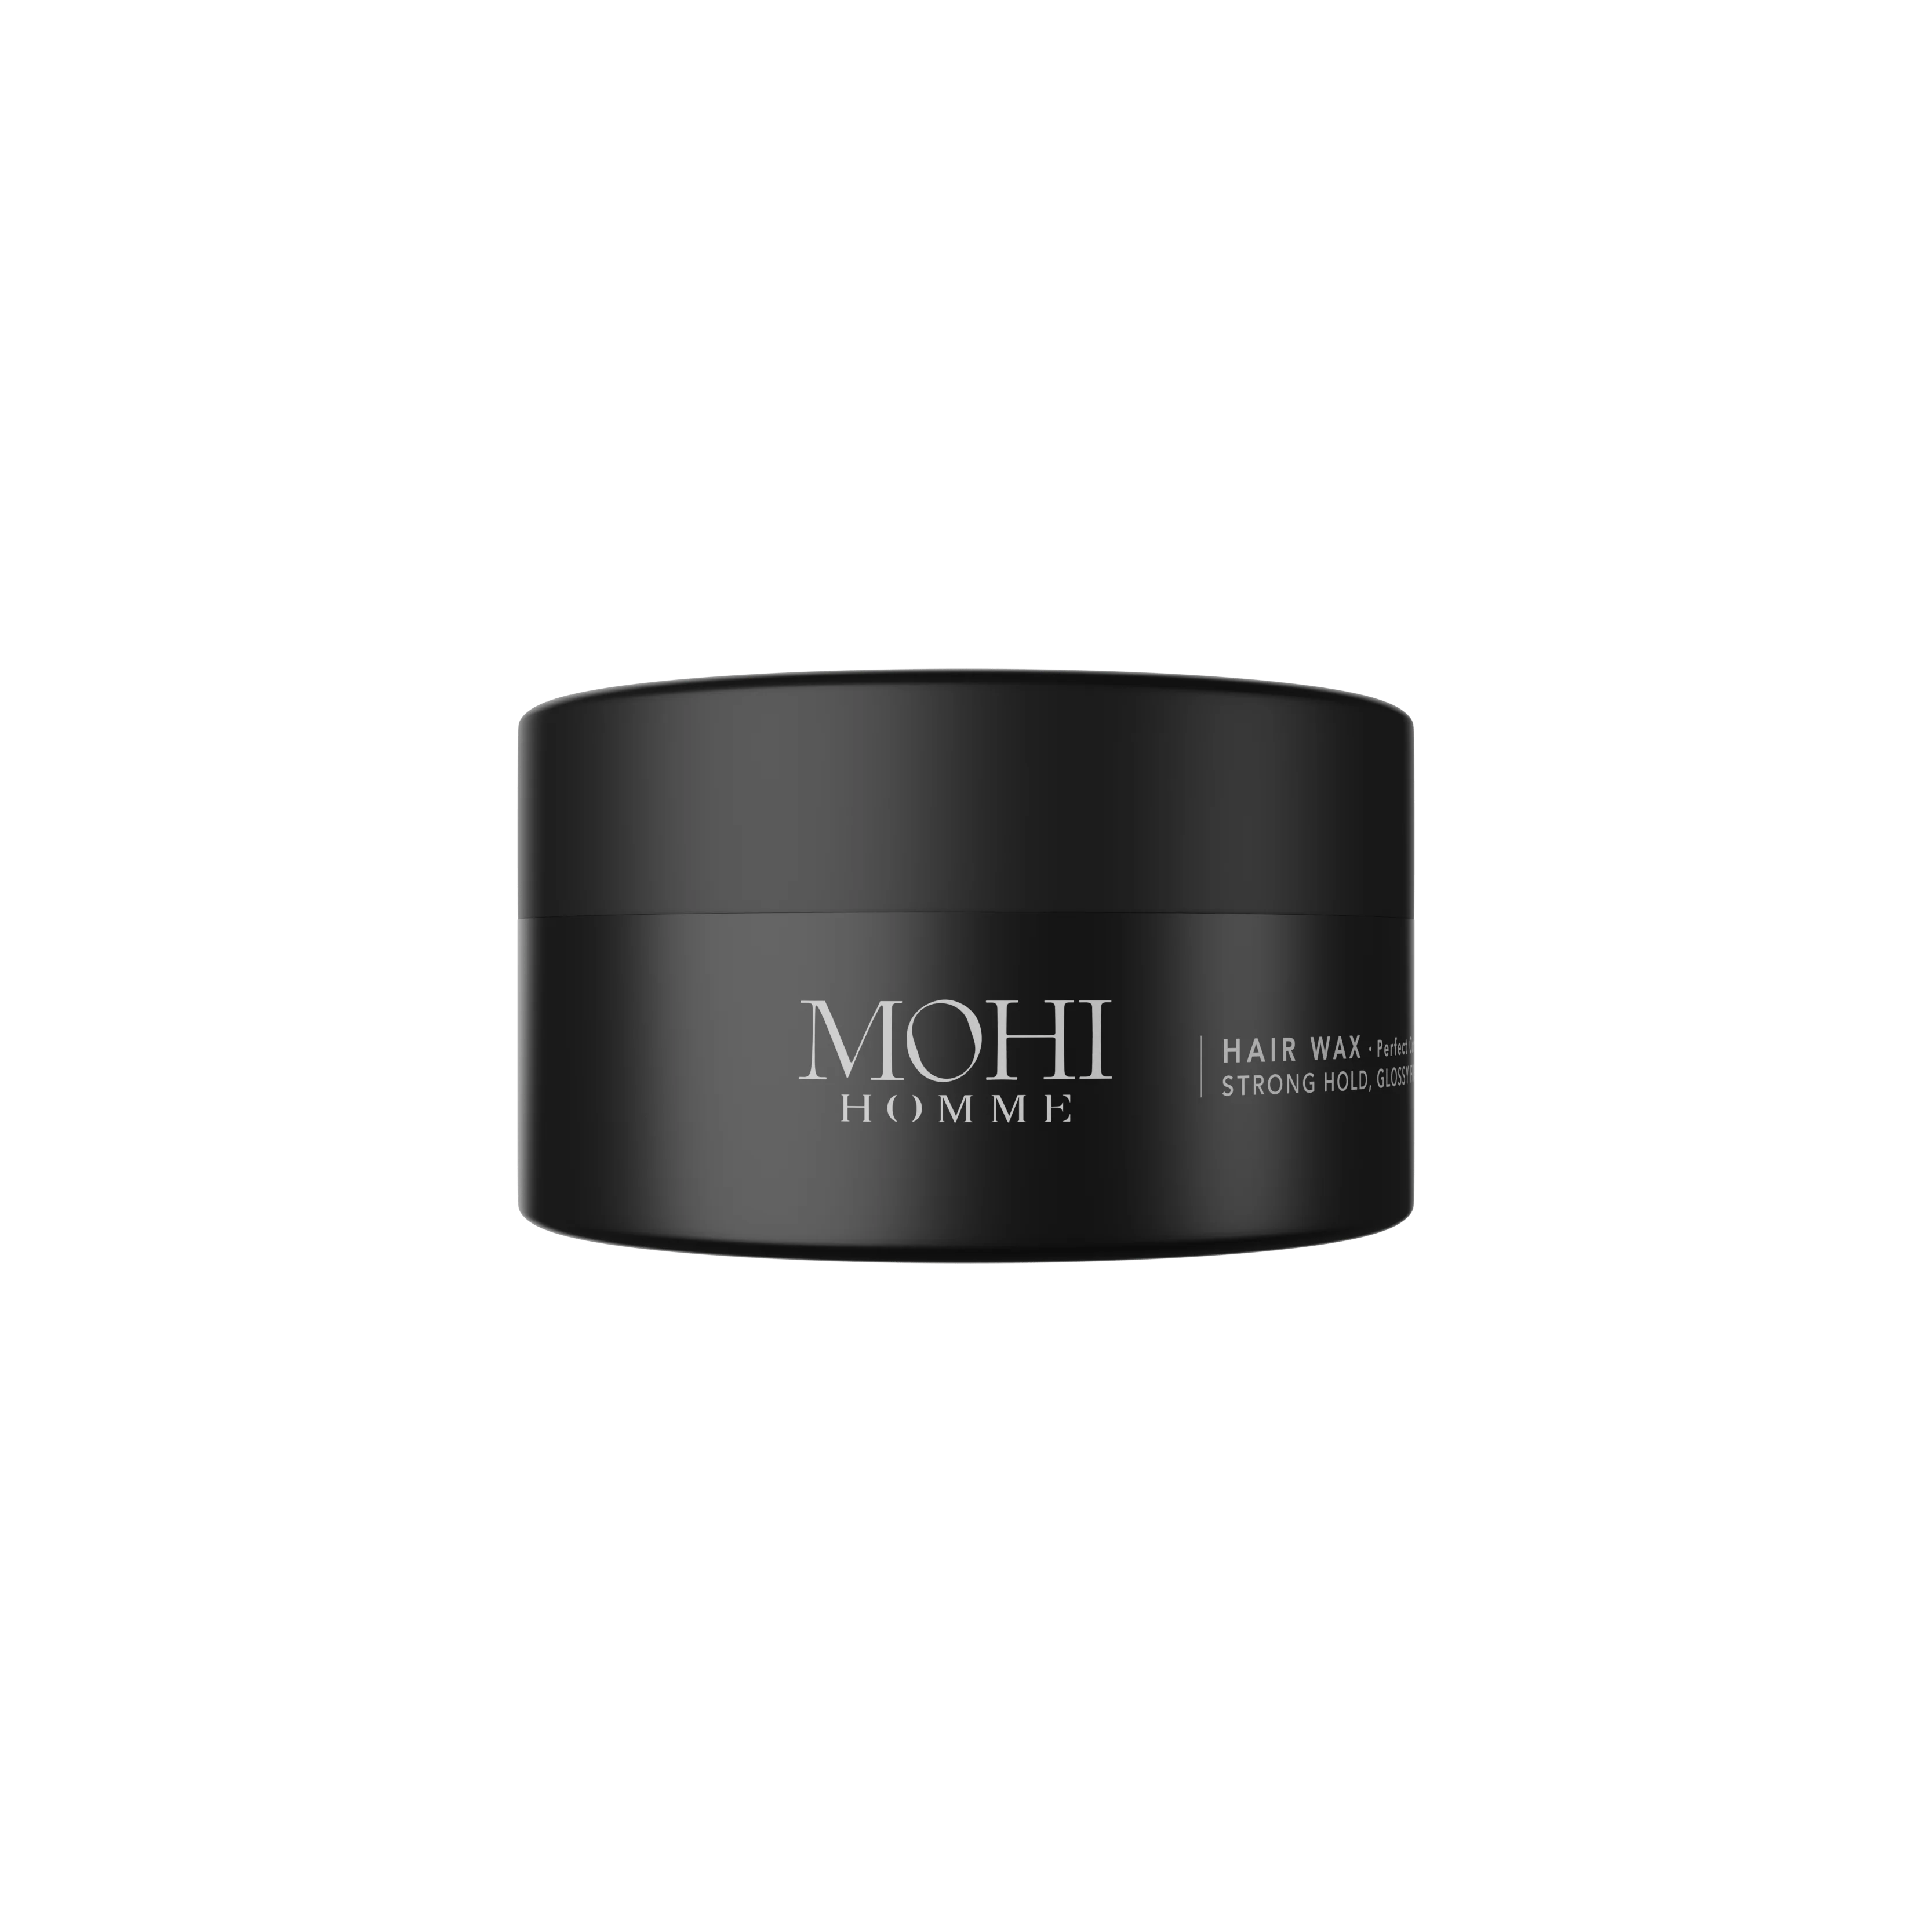 OUTLET MOHI Homme Wax 100ml - Max Pro x MOHI